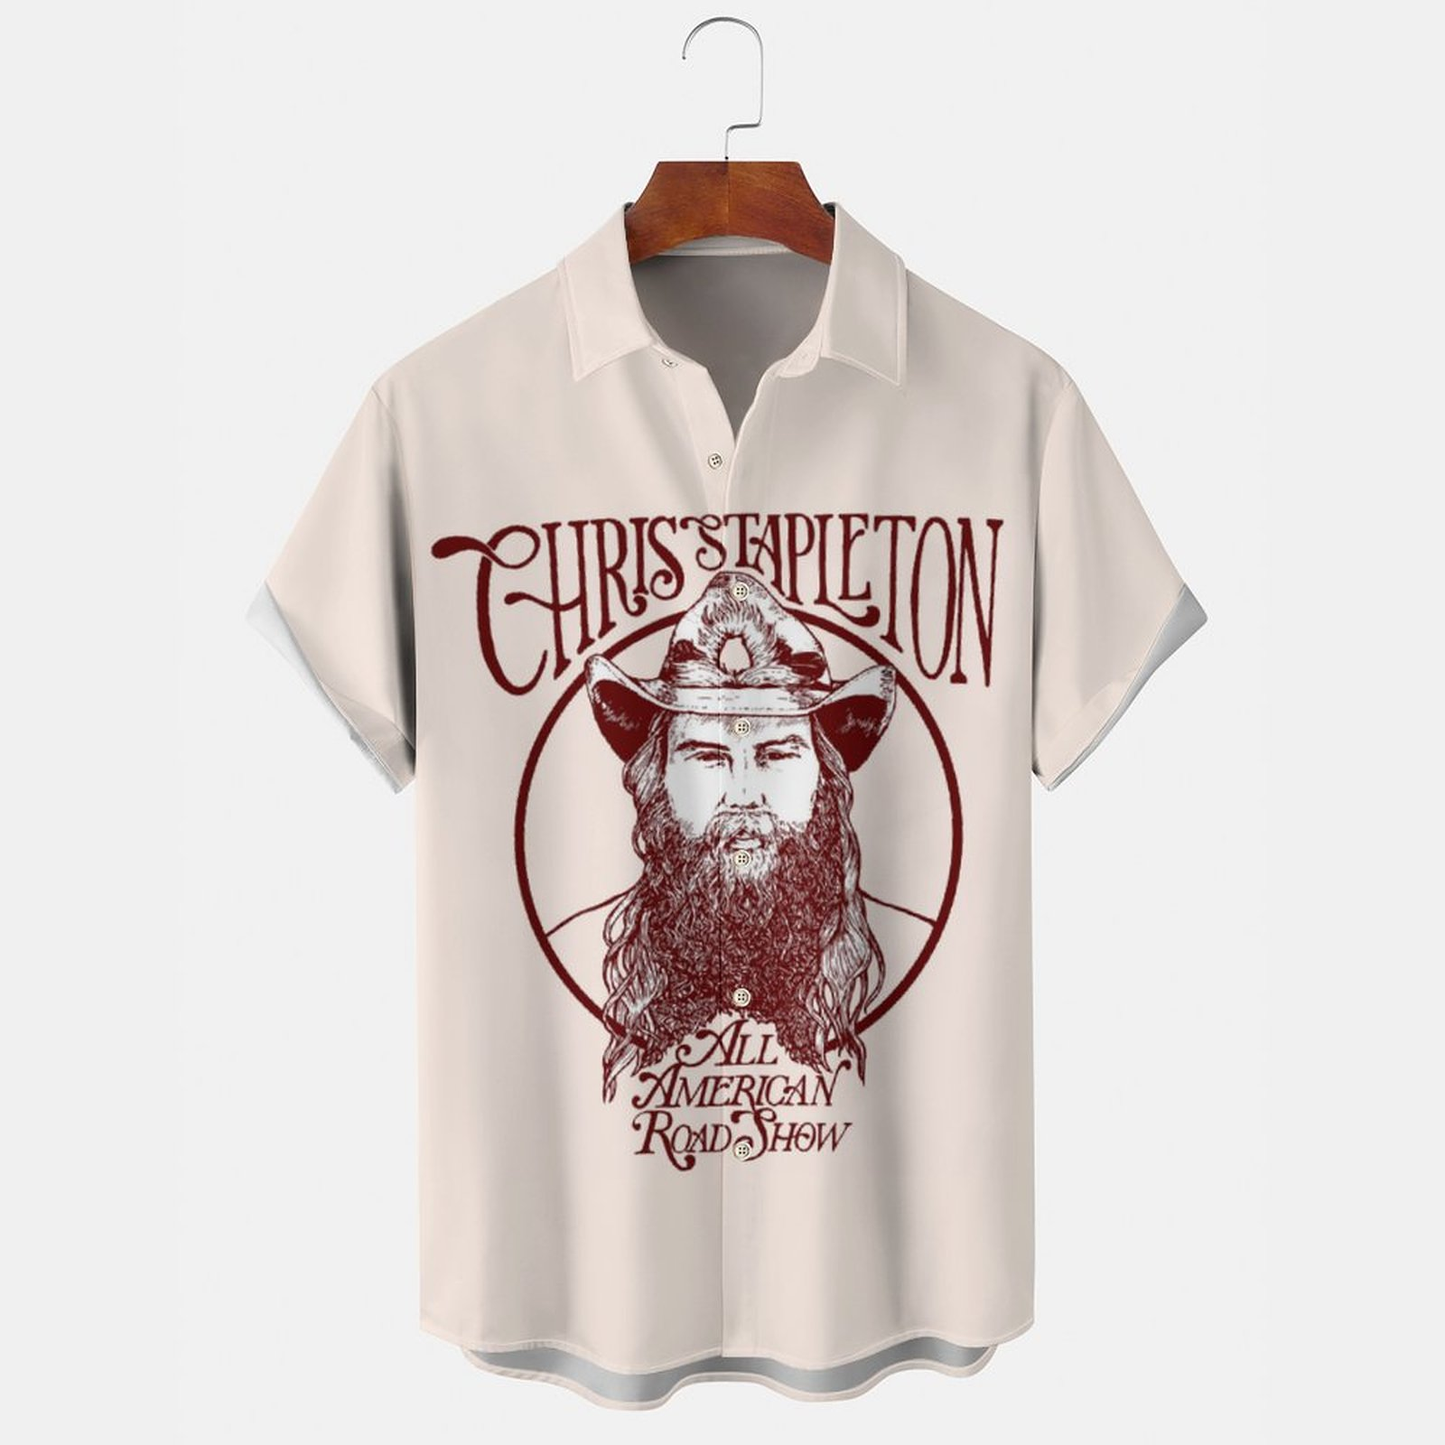 Chris Stapleton is coming to the United Supermarkets Arena Men's shirts